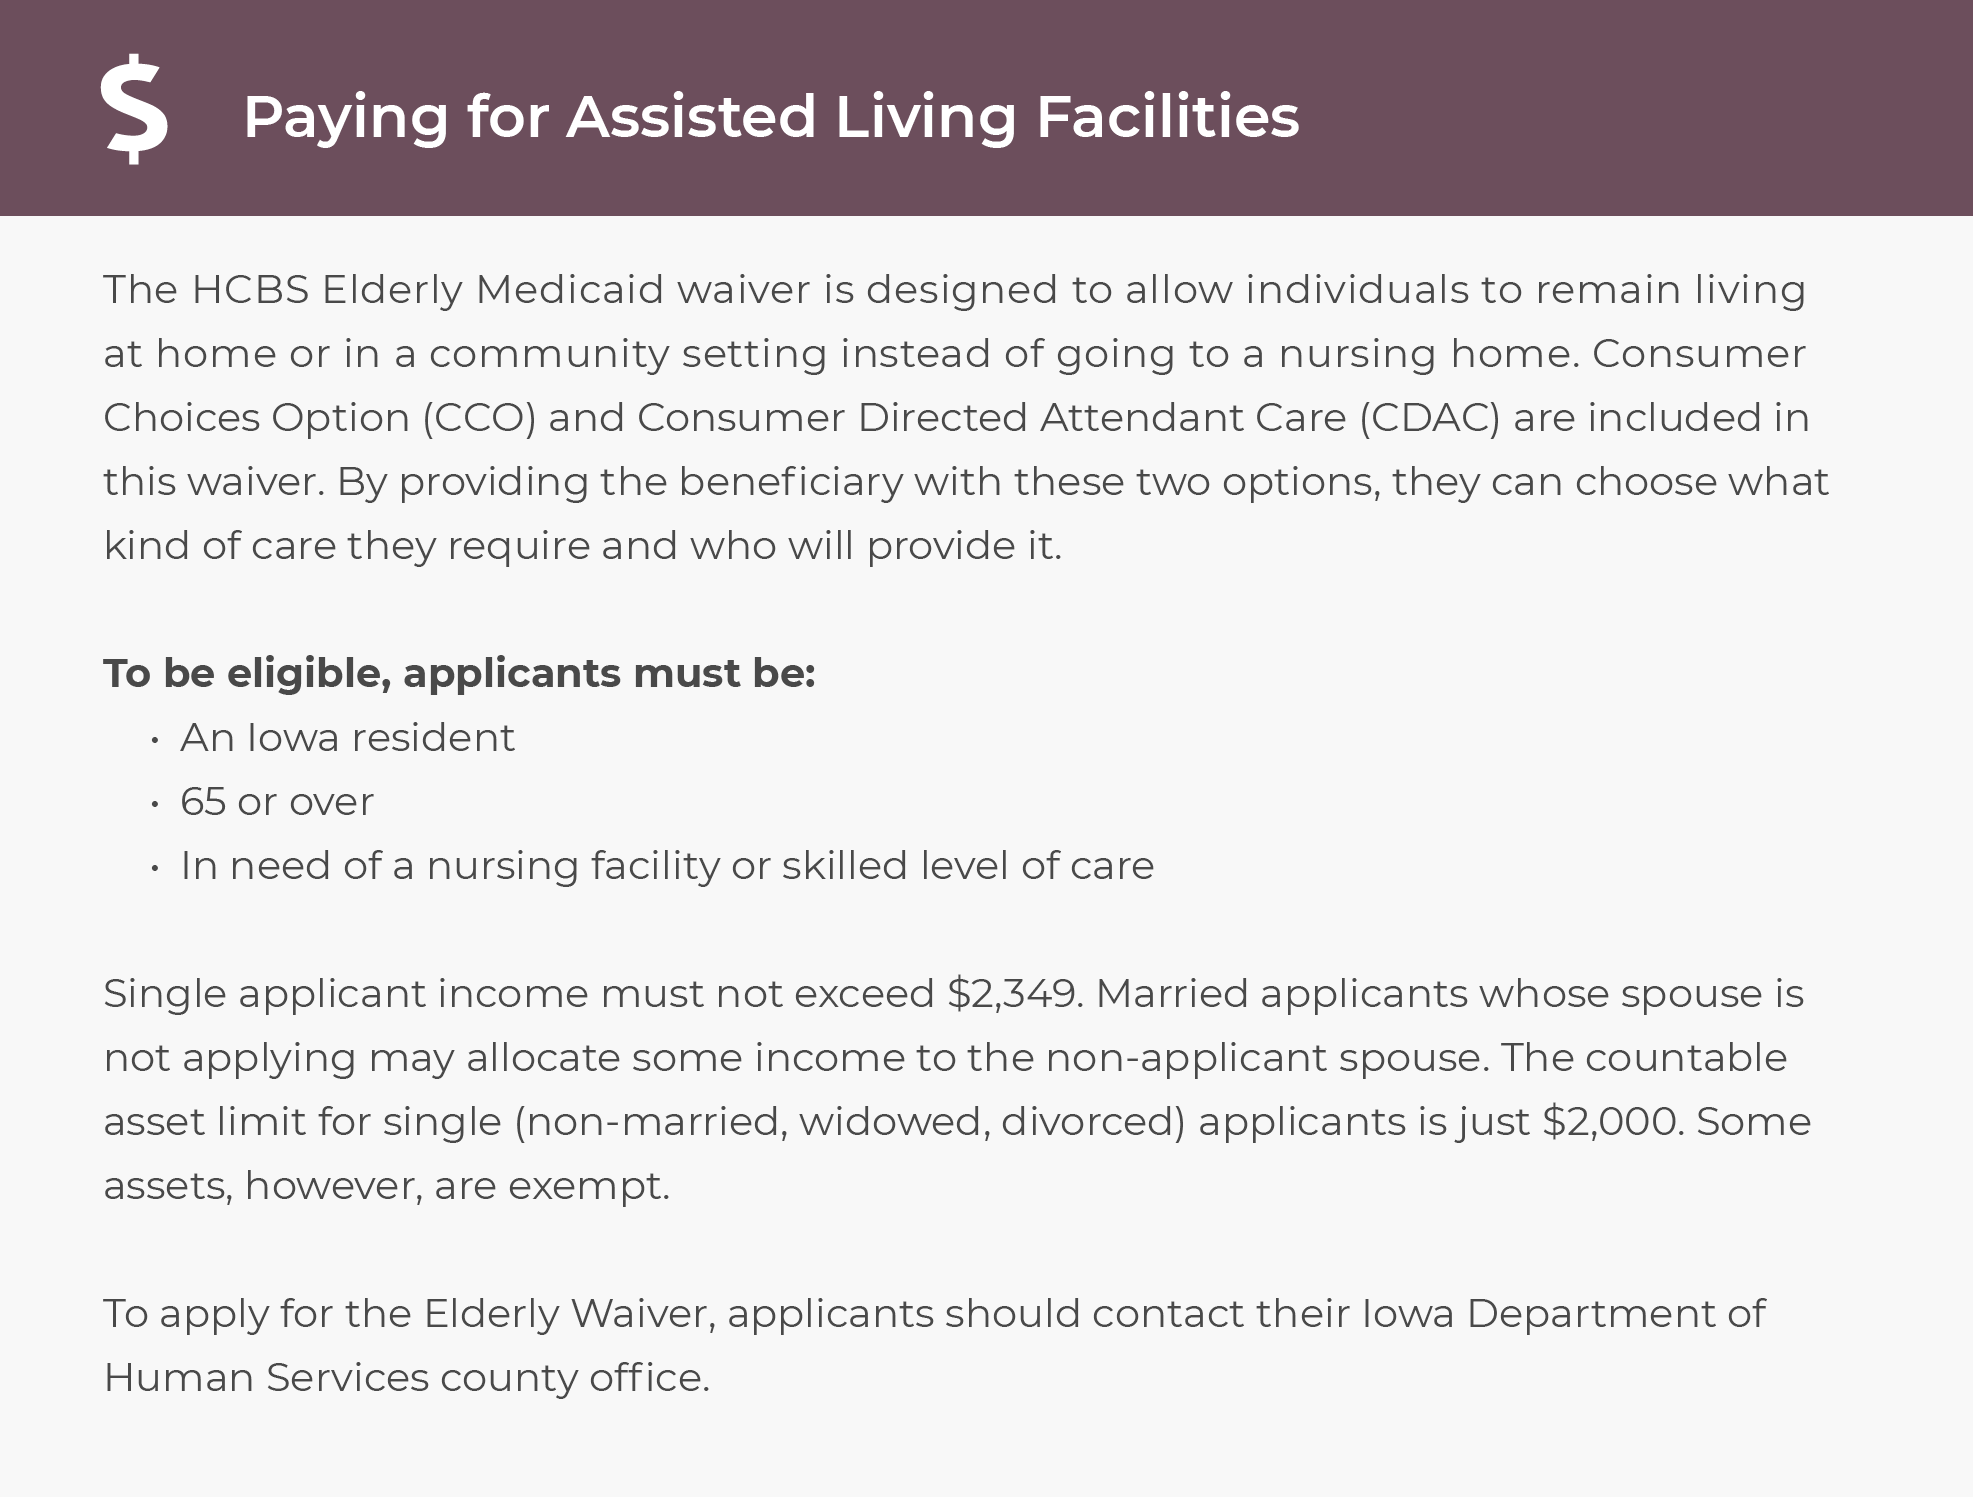 More ways to pay for Assisted Living in Iowa